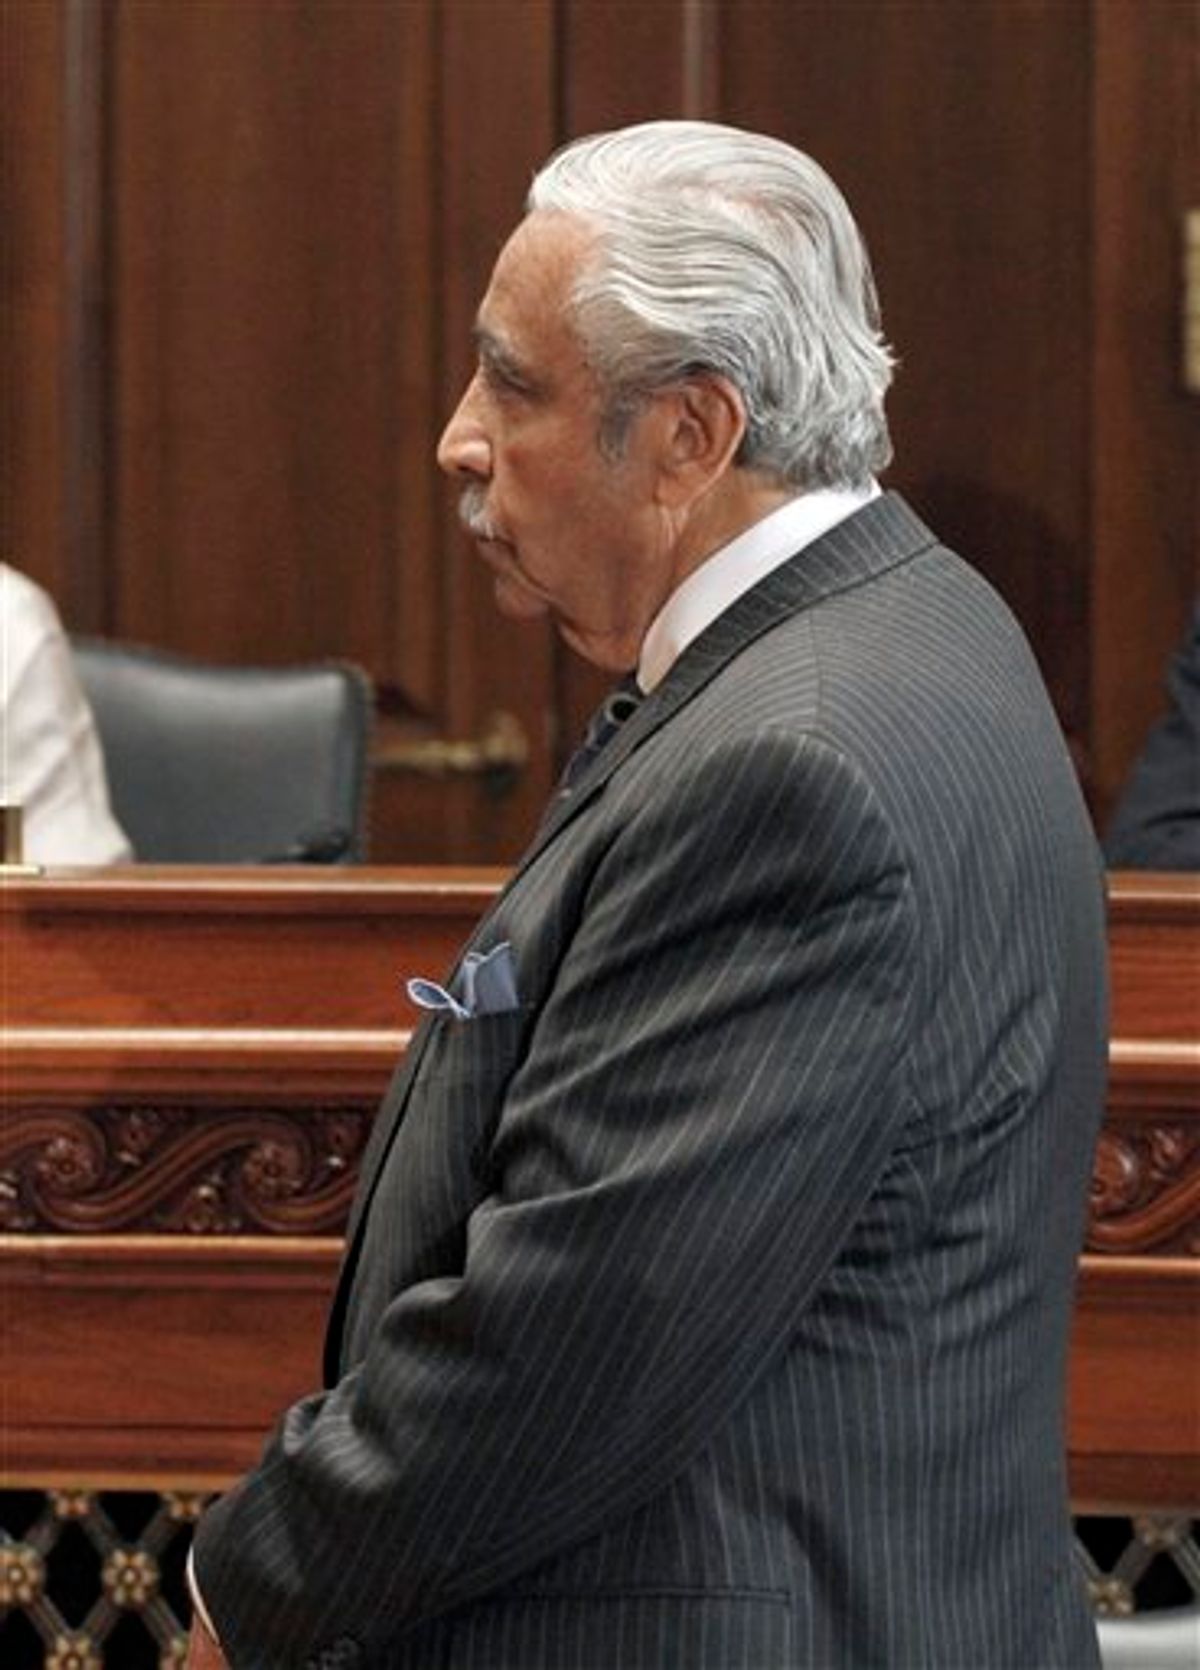 Rep. Charles Rangel, D-N.Y., listens to House ethics committee chairman Rep. Zoe Lofgren, D-Calif, on Capitol Hill in Washington, Thursday, Nov. 18, 2010. The committee recommended censure for Rangel, suggesting that the New York Democrat suffer the embarrassment of standing before his colleagues while receiving an oral rebuke by the speaker for financial and fundraising misconduct. (AP Photo/Harry Hamburg) (AP)